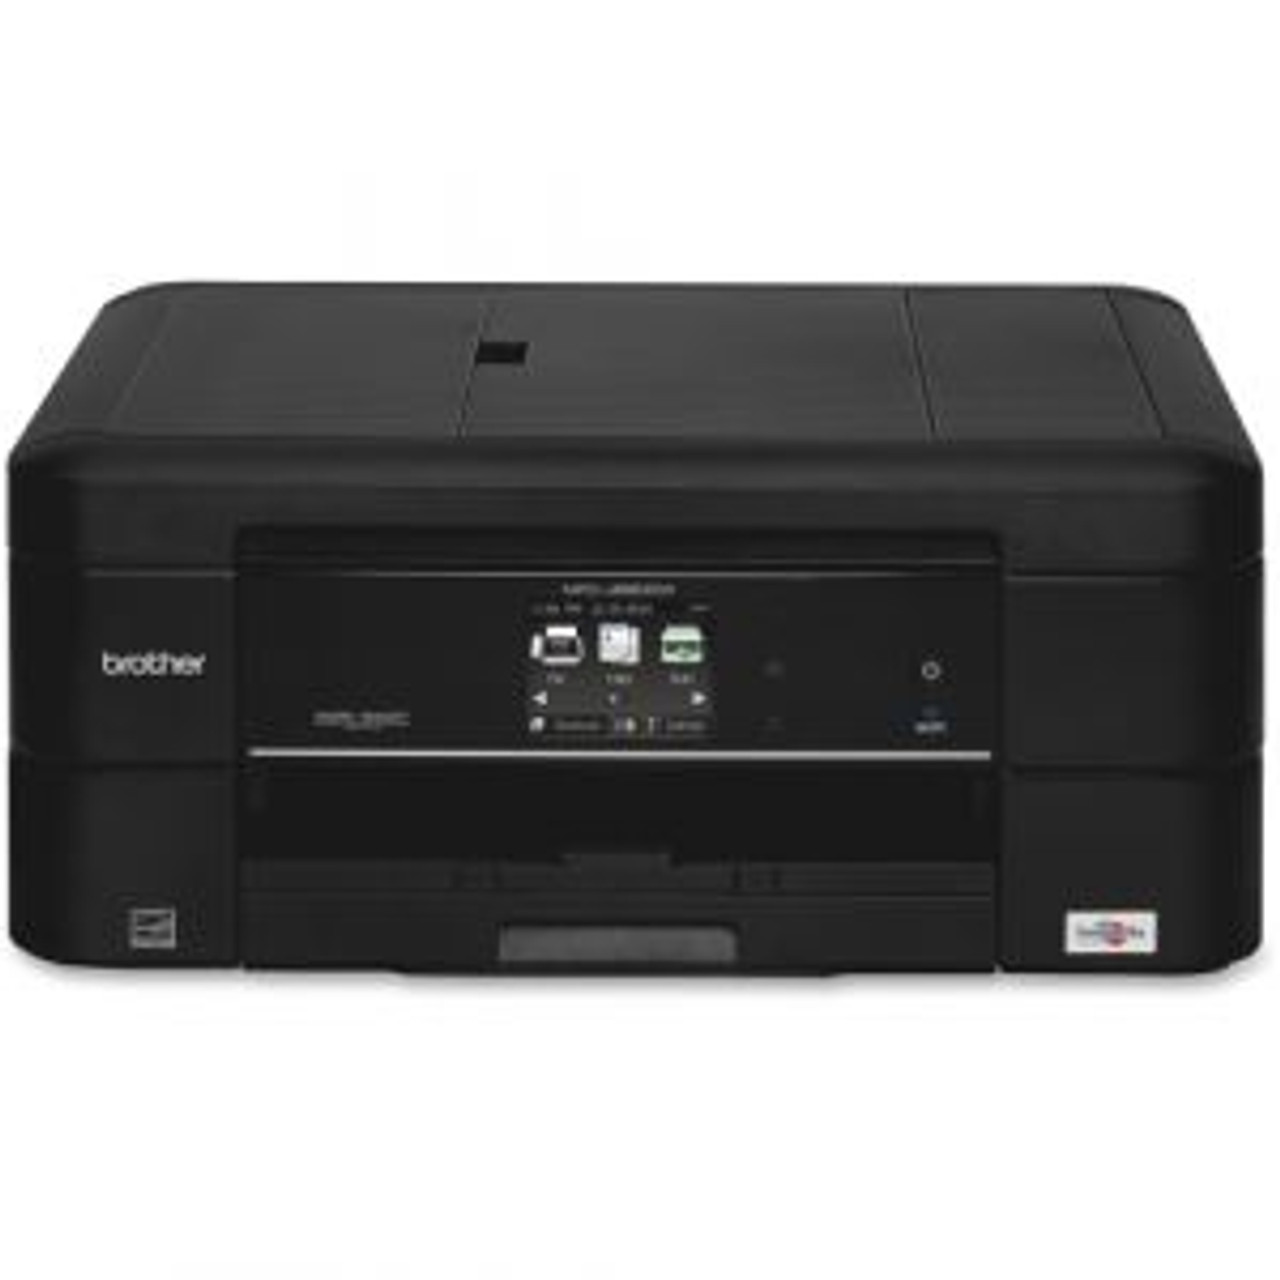 MFC-J680DW Brother InkJet All-in-One Printer Color -